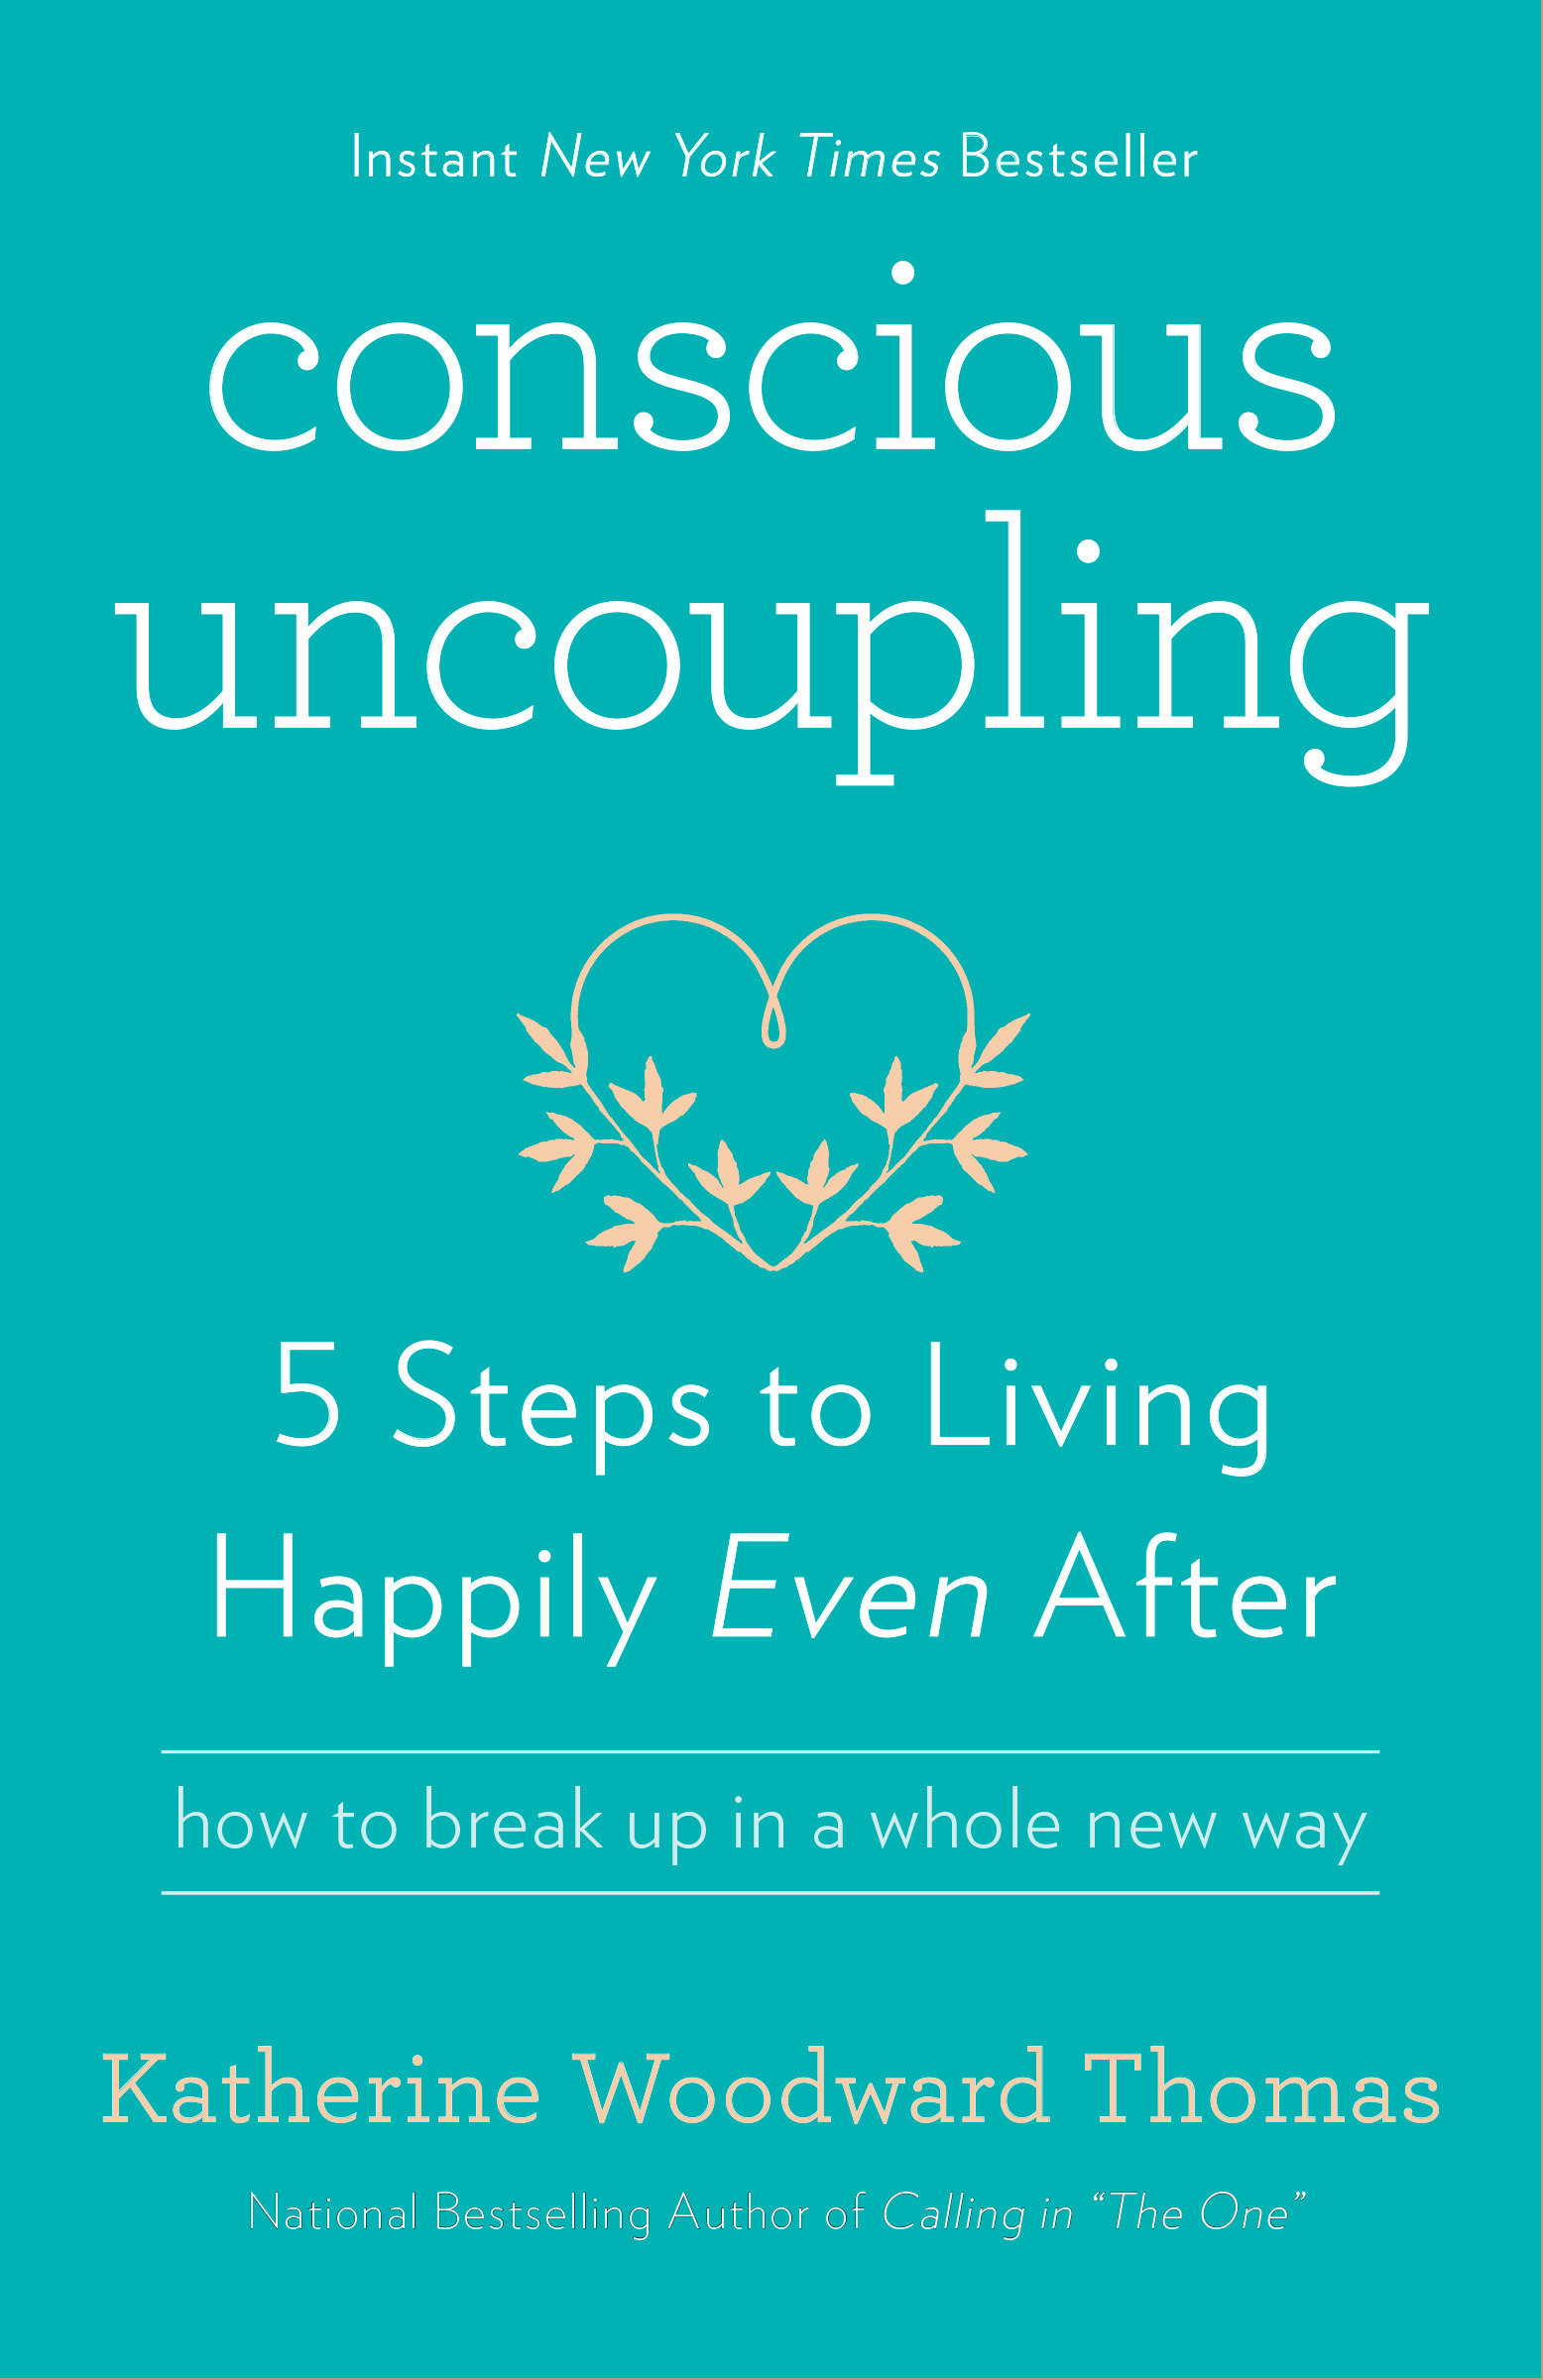 Conscious uncoupling 5 steps to living happily even after cover image